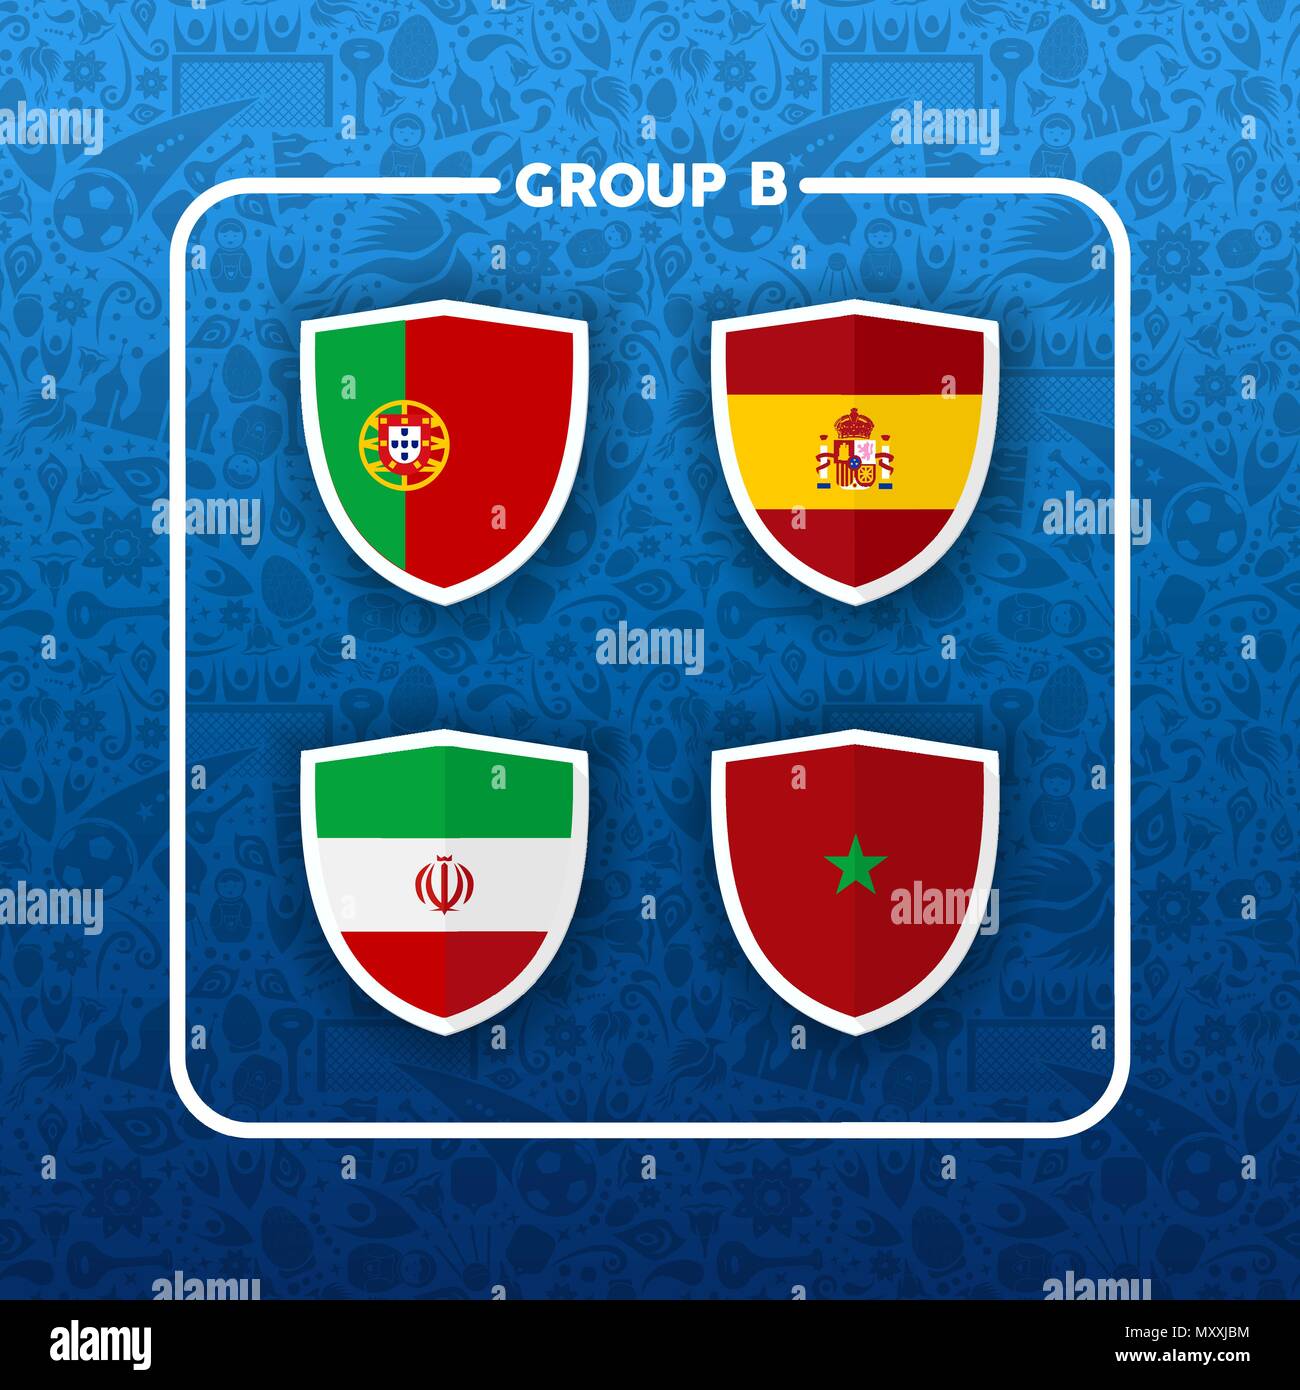 Soccer championship event schedule for 2018. Group B country team list of football match games. Includes Portugal, Iran, Spain and Morocco. EPS10 vect Stock Vector